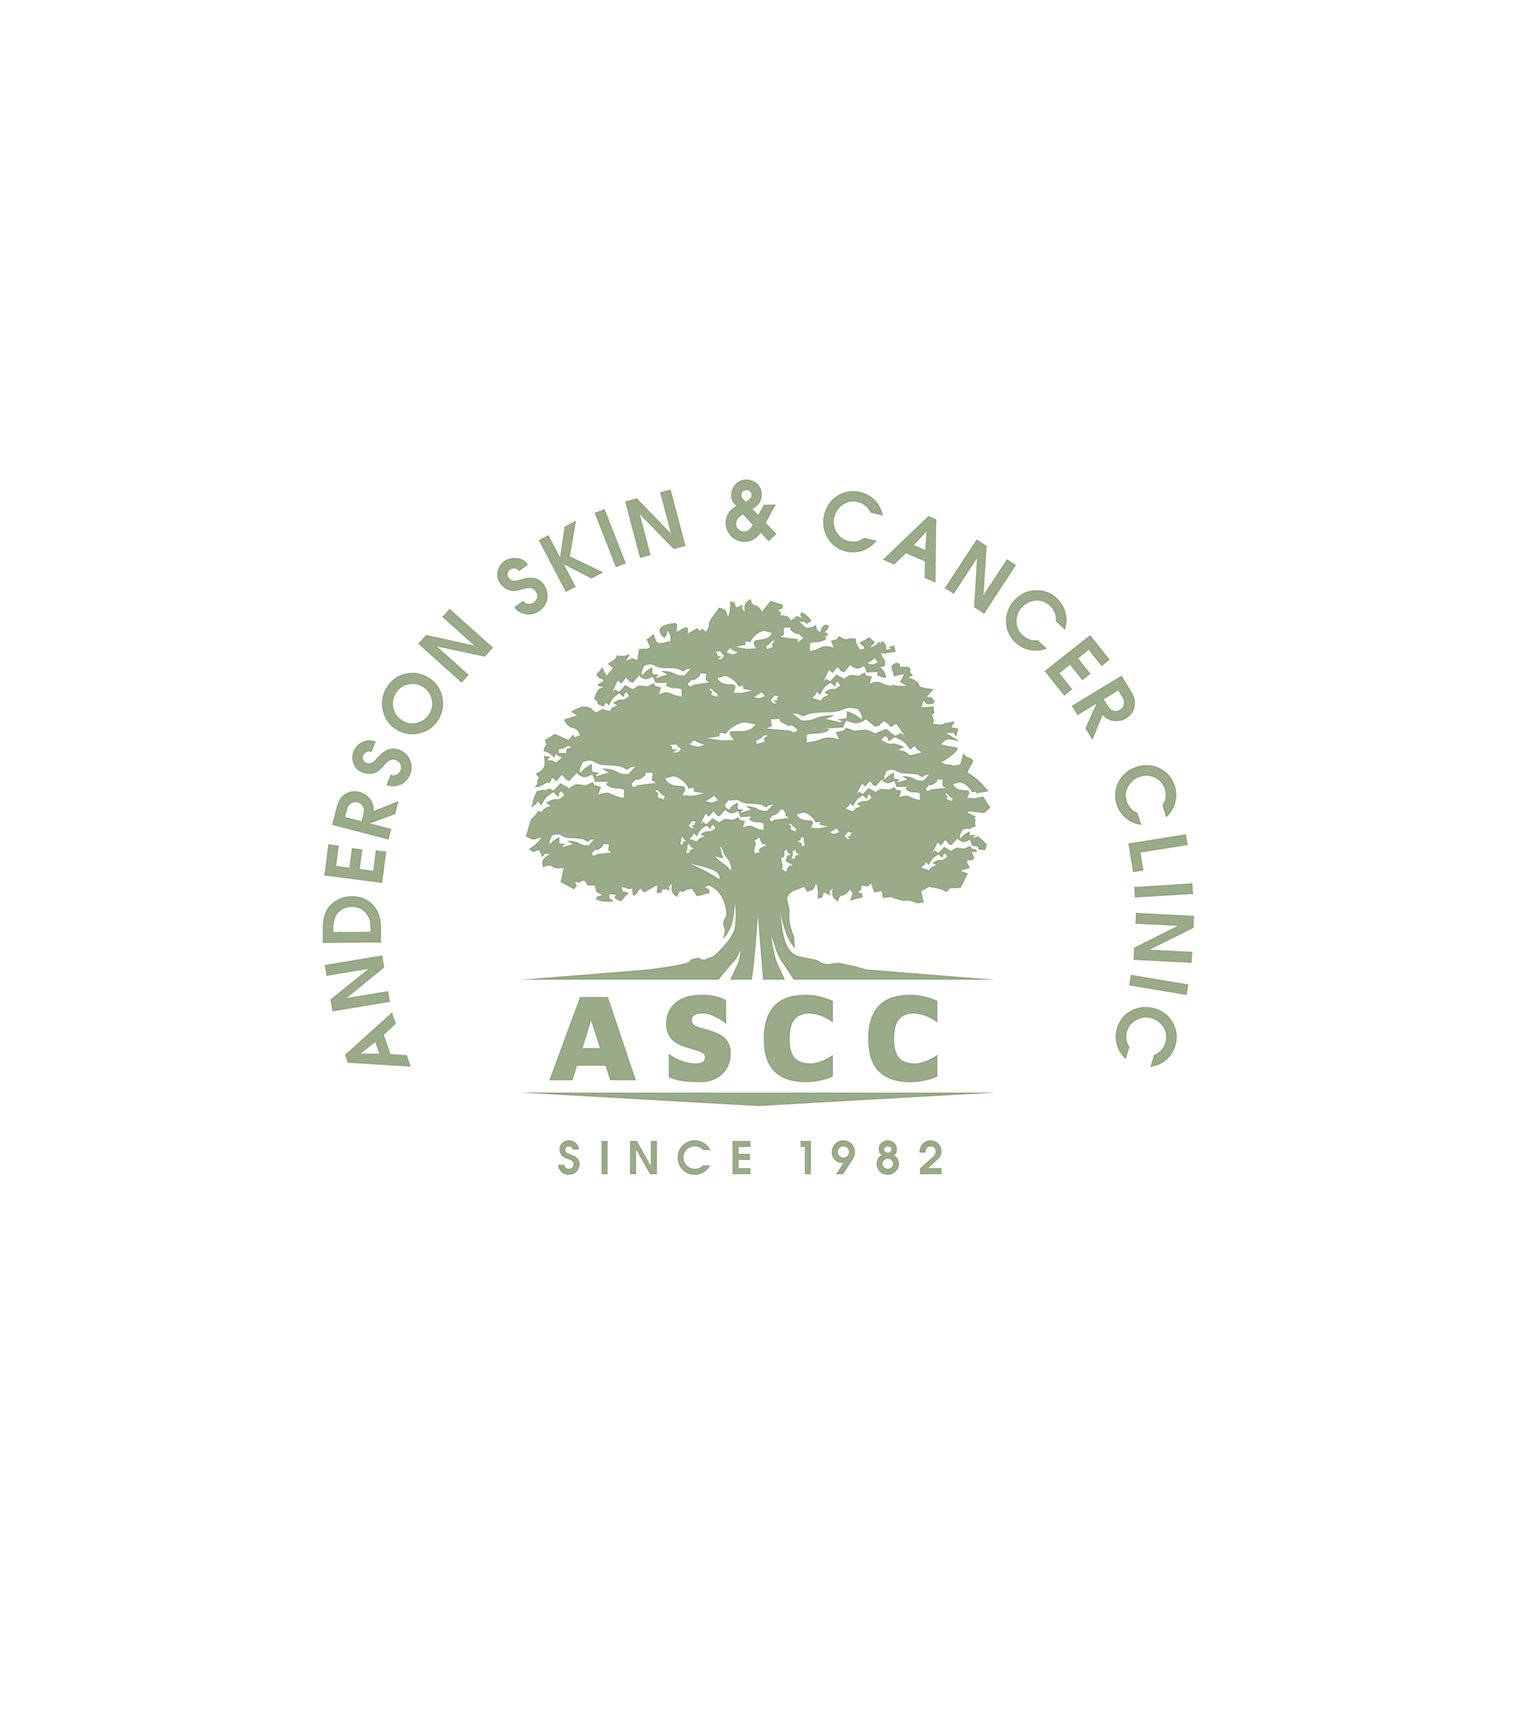 Anderson Skin & Cancer Clinic_final-01.png